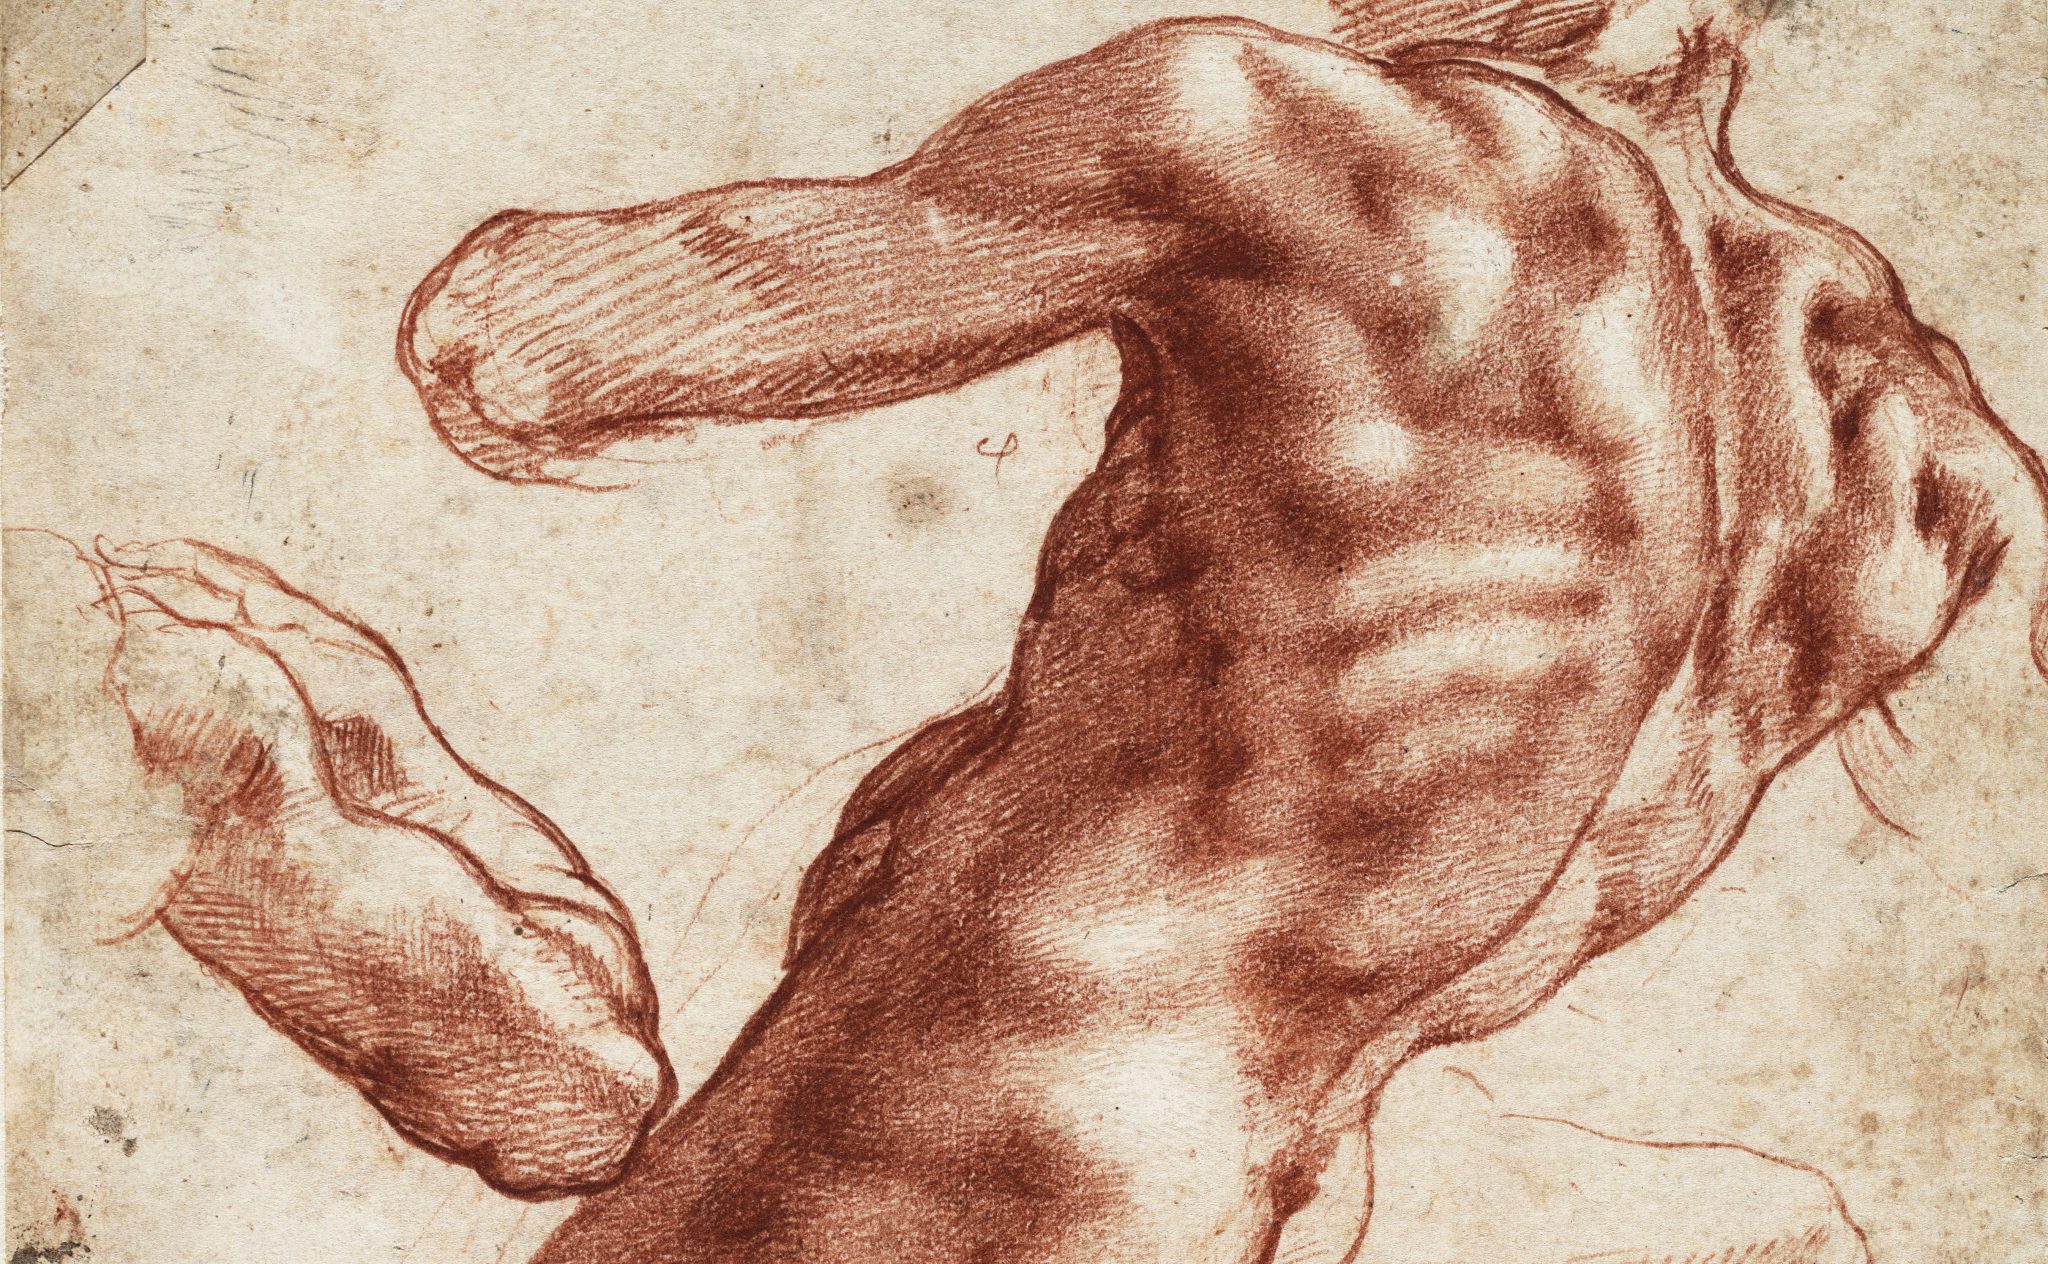 Michelangelo: Mind of the Master, Cleveland Museum of Art